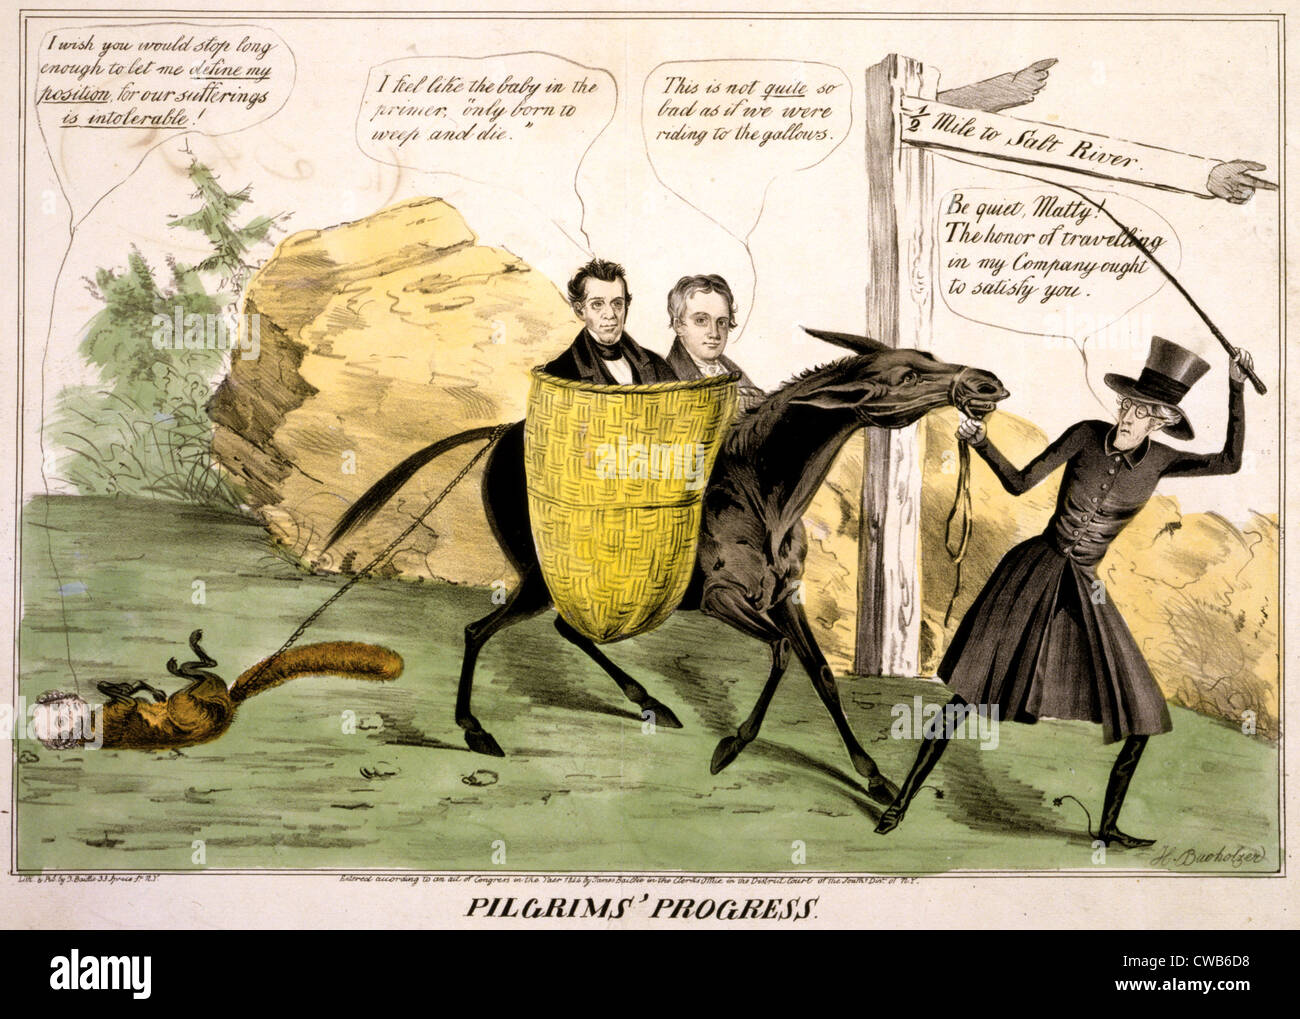 Political Cartoon Of President Andrew Jackson Depicting Him As